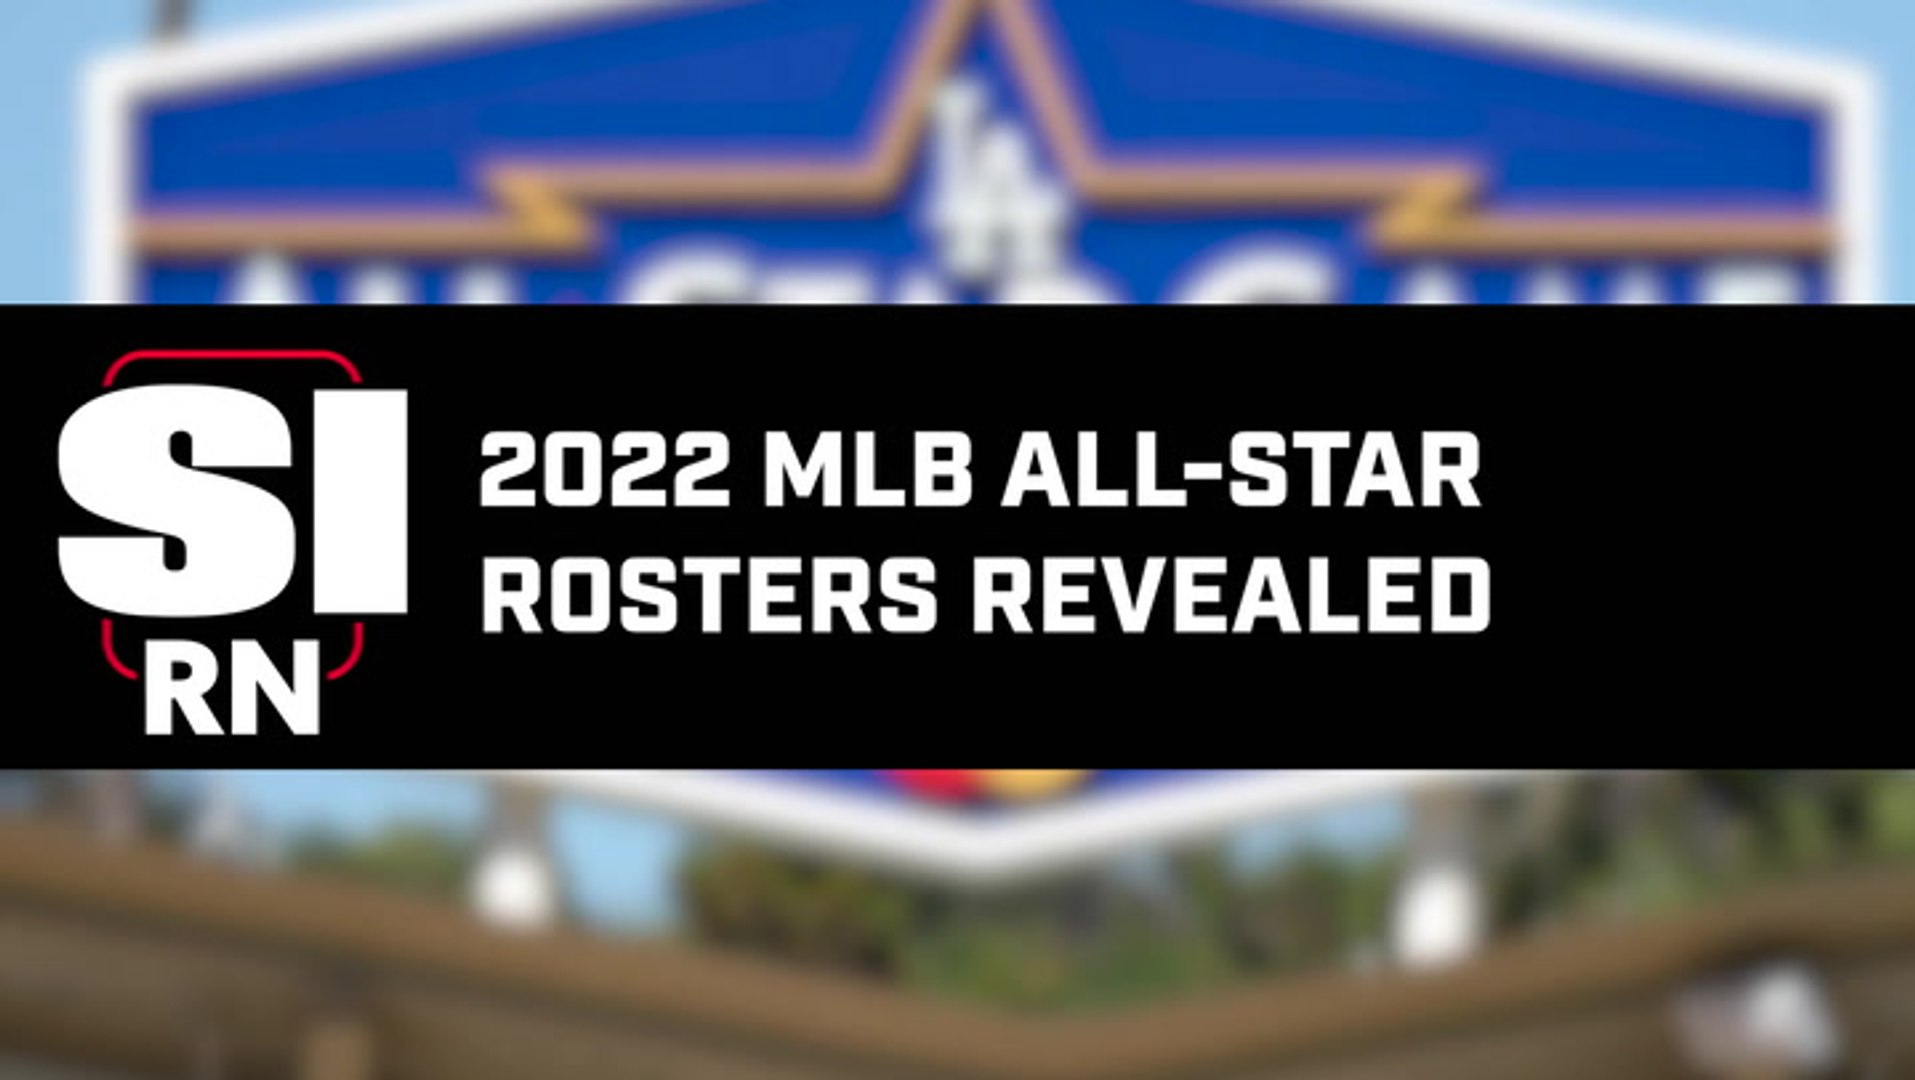 Rosters are revealed for all-star game